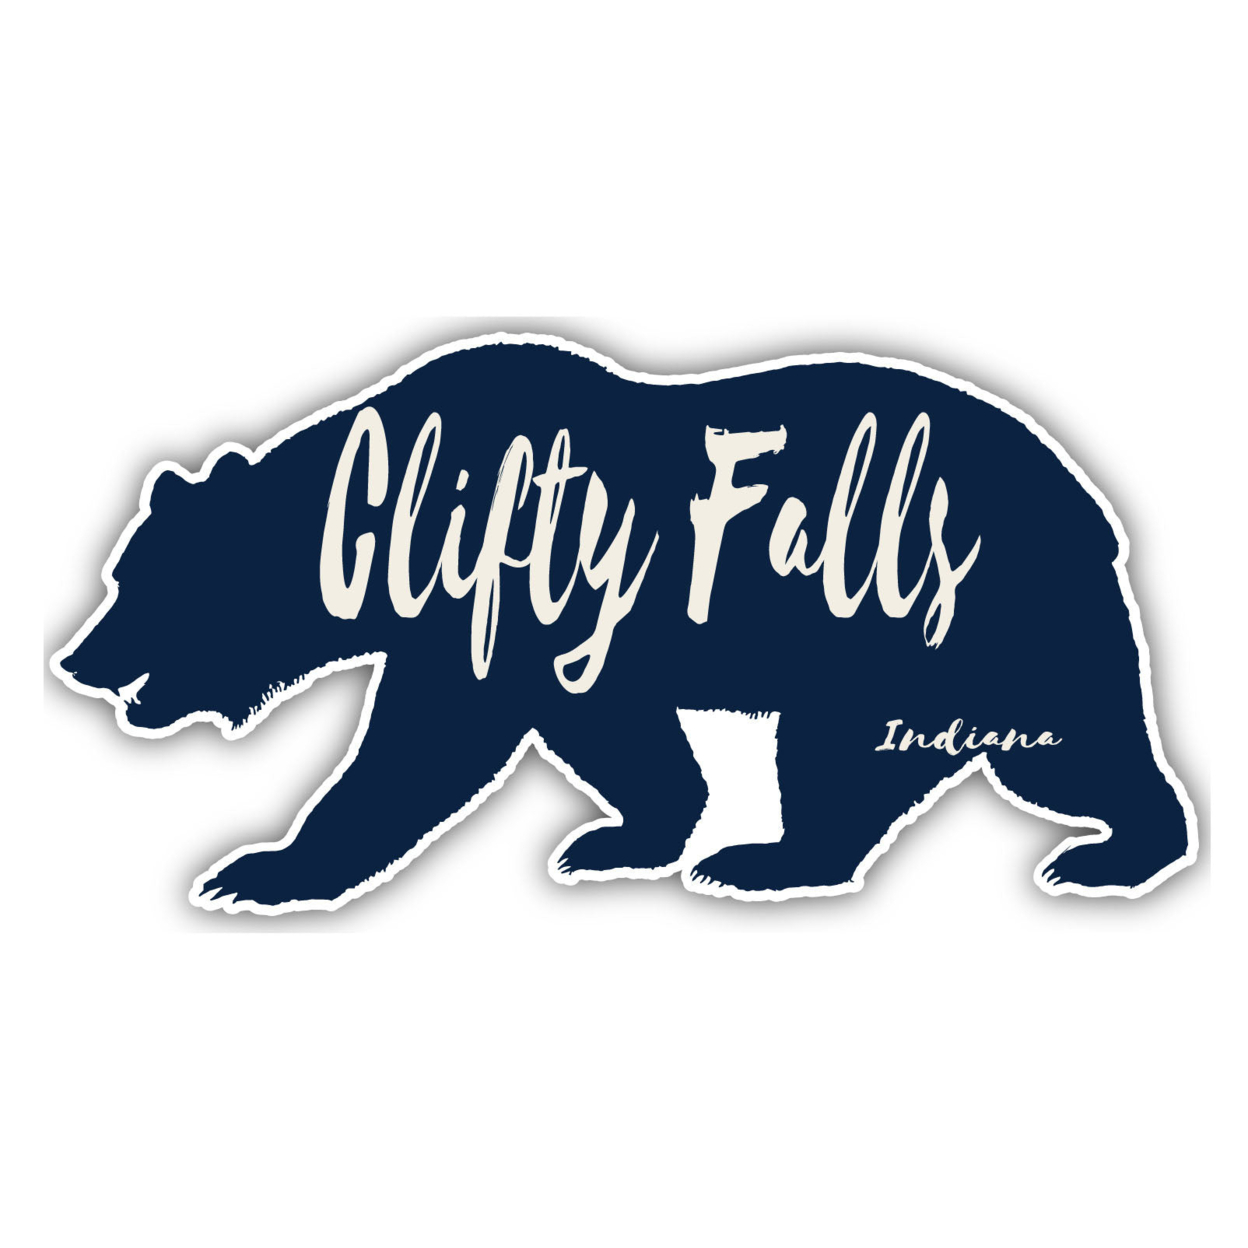 Clifty Falls Indiana Souvenir Decorative Stickers (Choose Theme And Size) - 4-Pack, 4-Inch, Great Outdoors